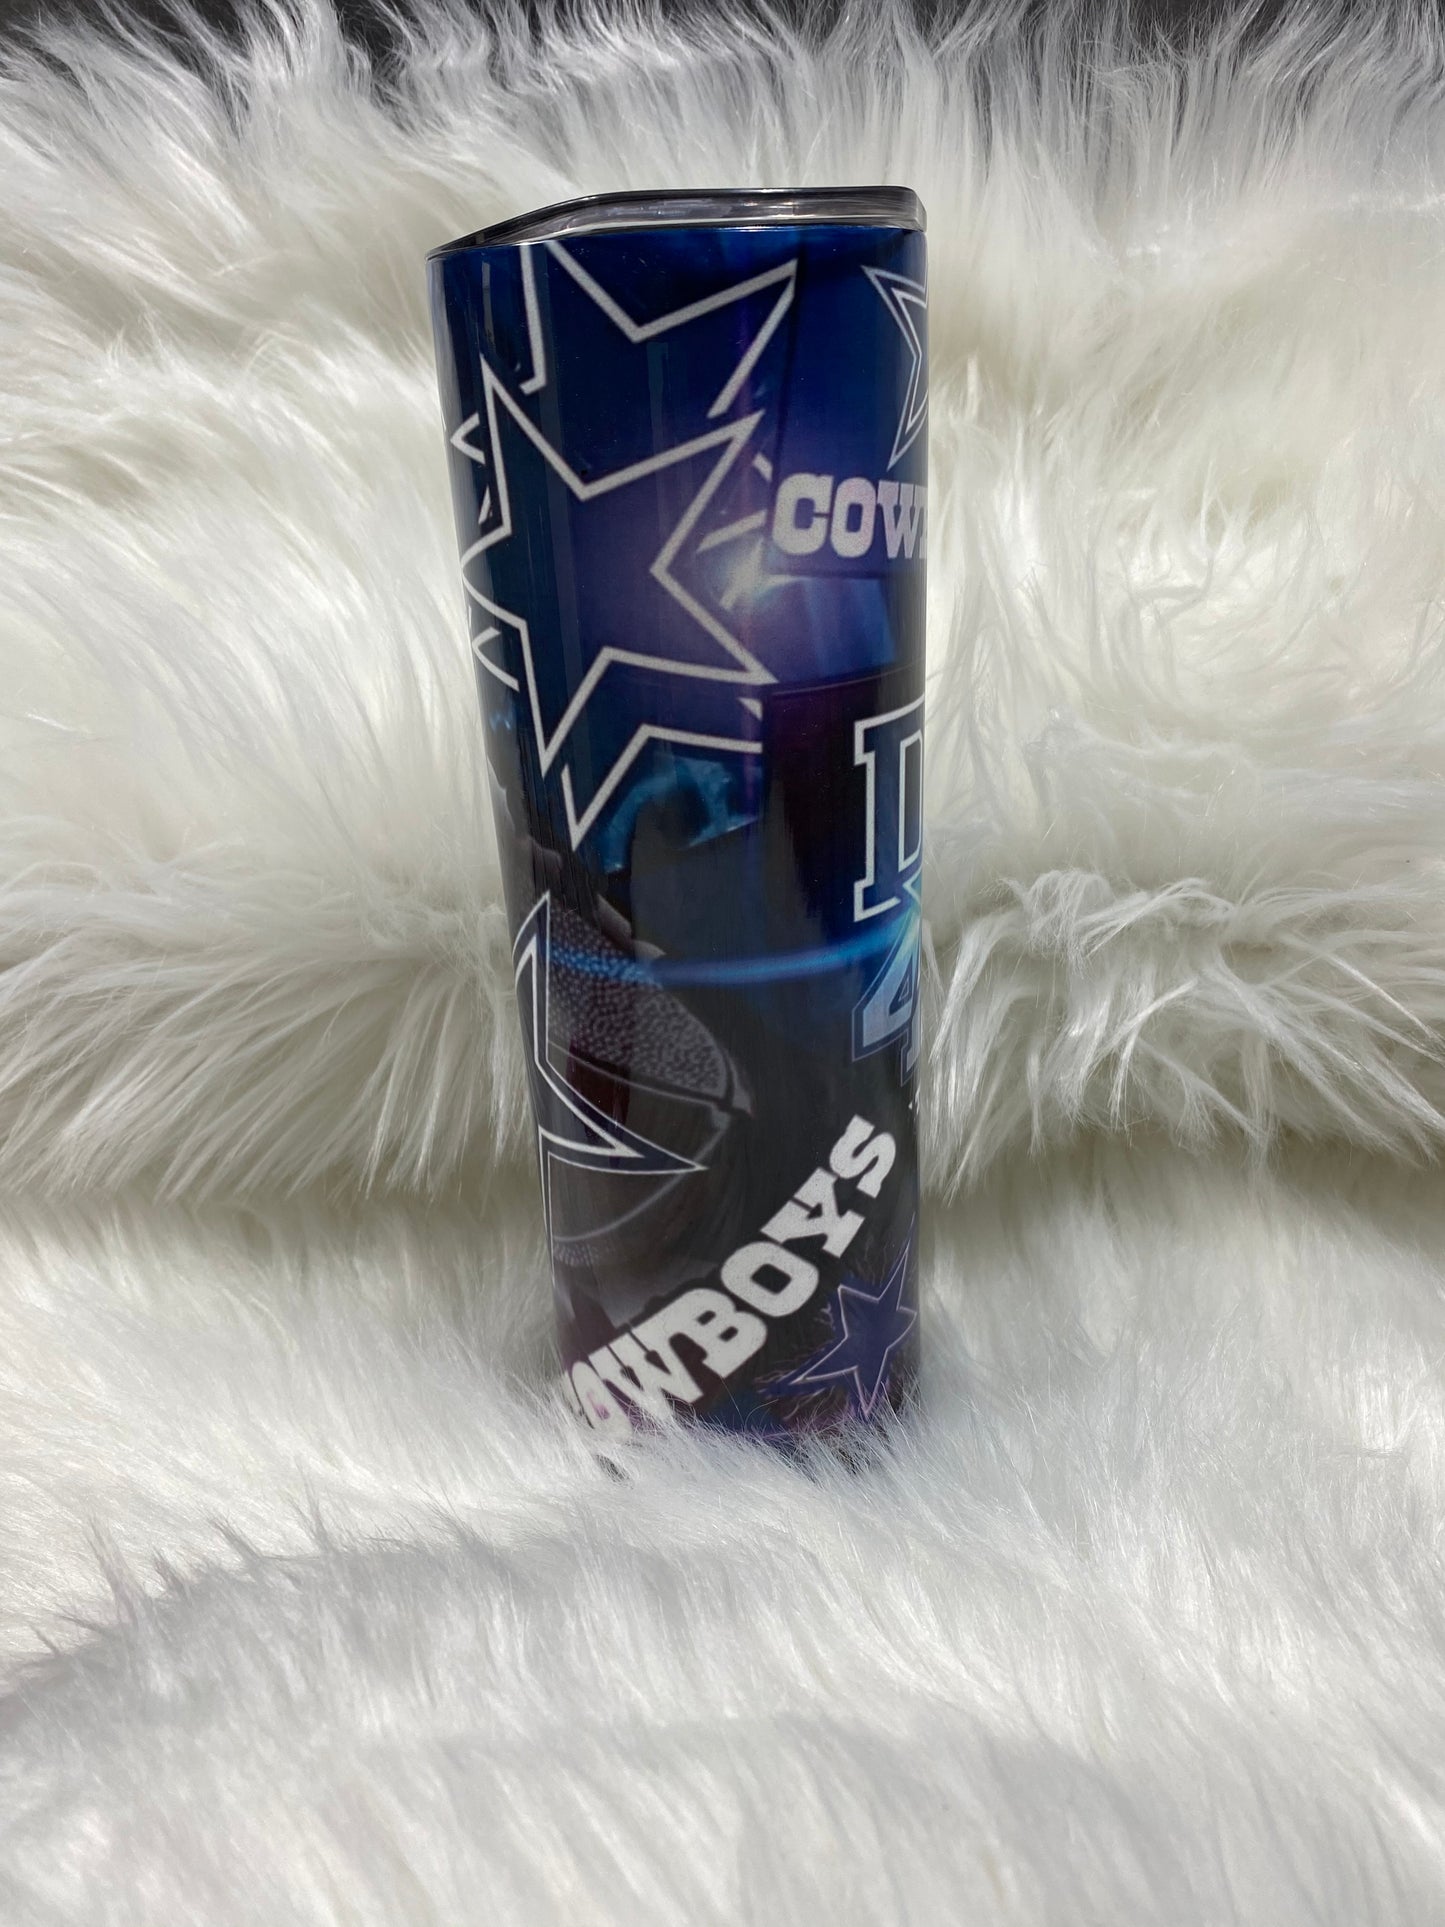 Cowboys insulated Tumbler